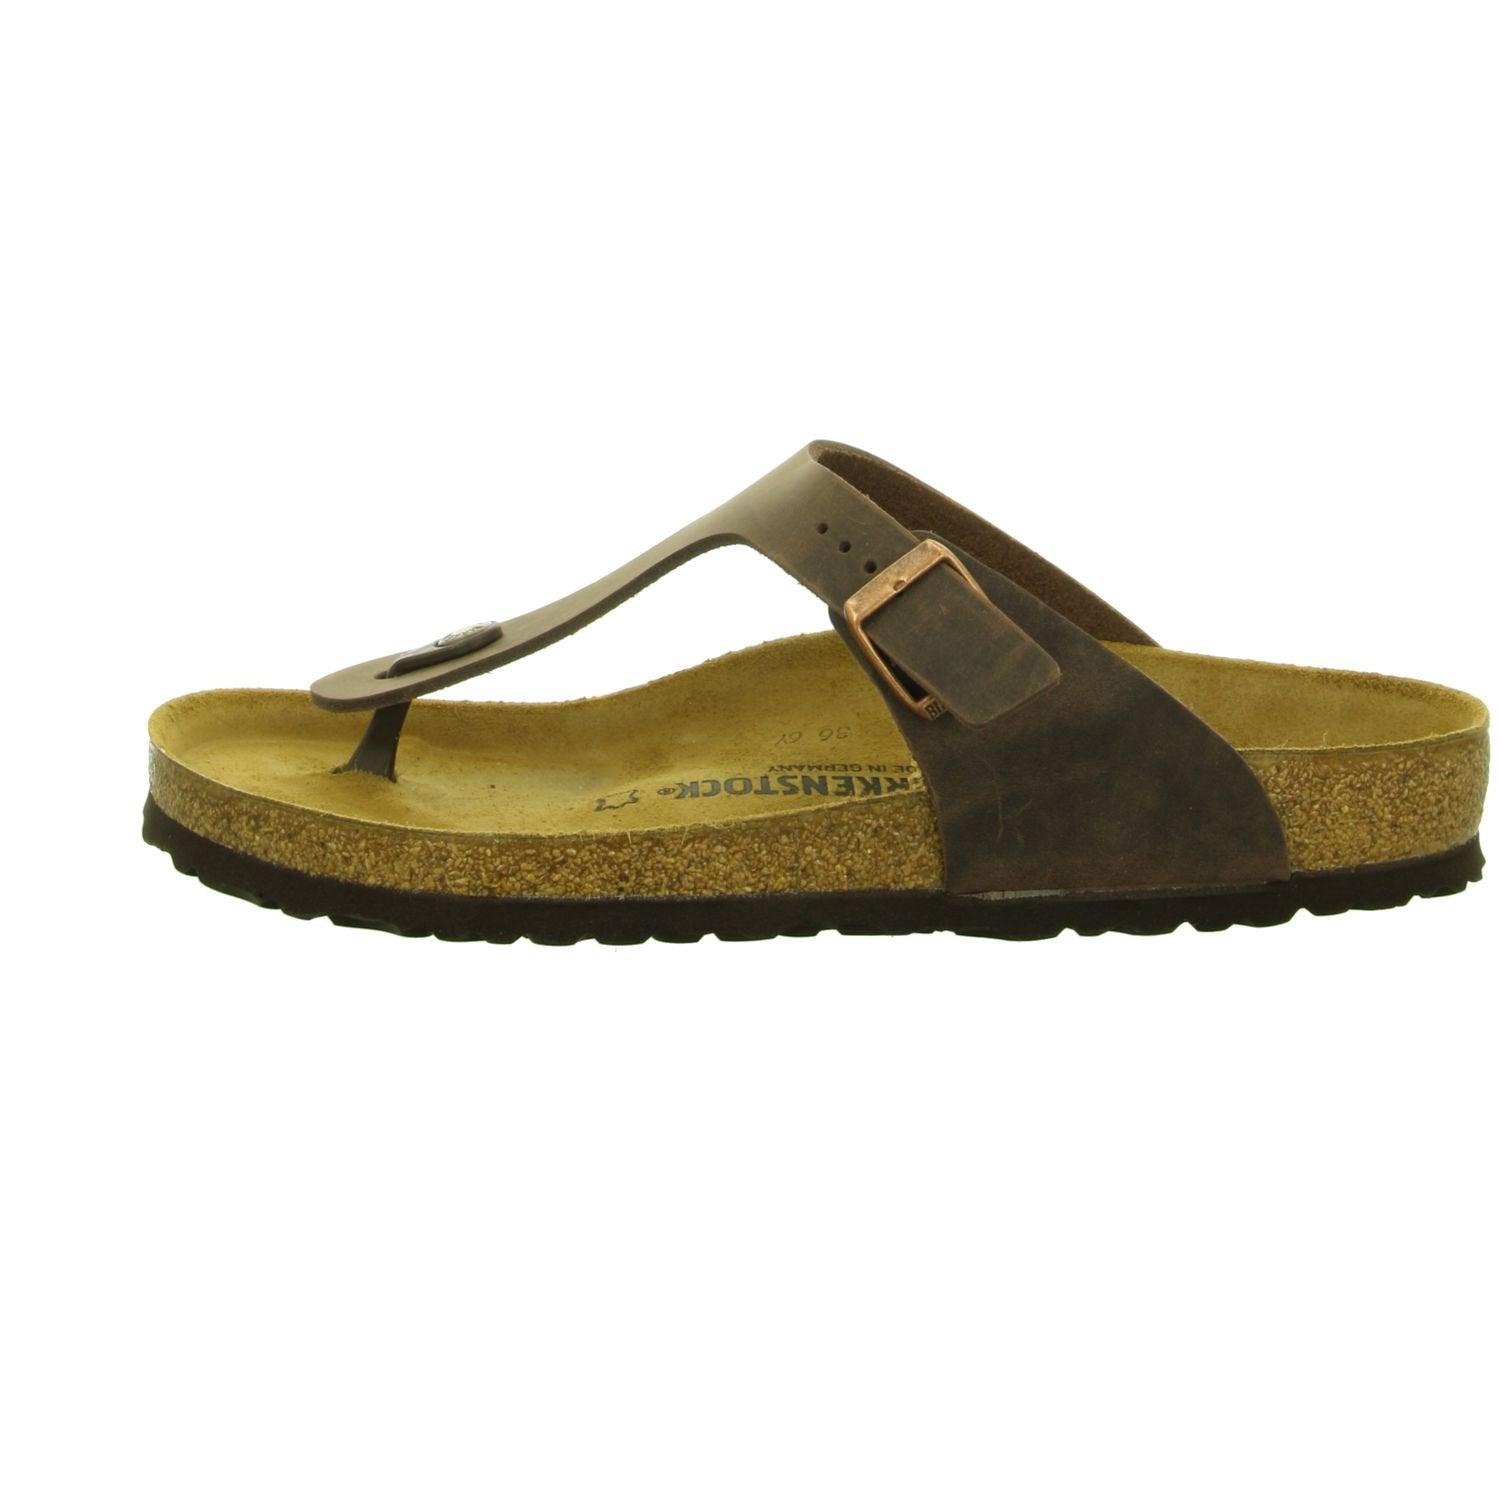 BIRKENSTOCK Gizeh Oiled Leather Habana Oiled Leather 39 (US Women's 8-8.5)